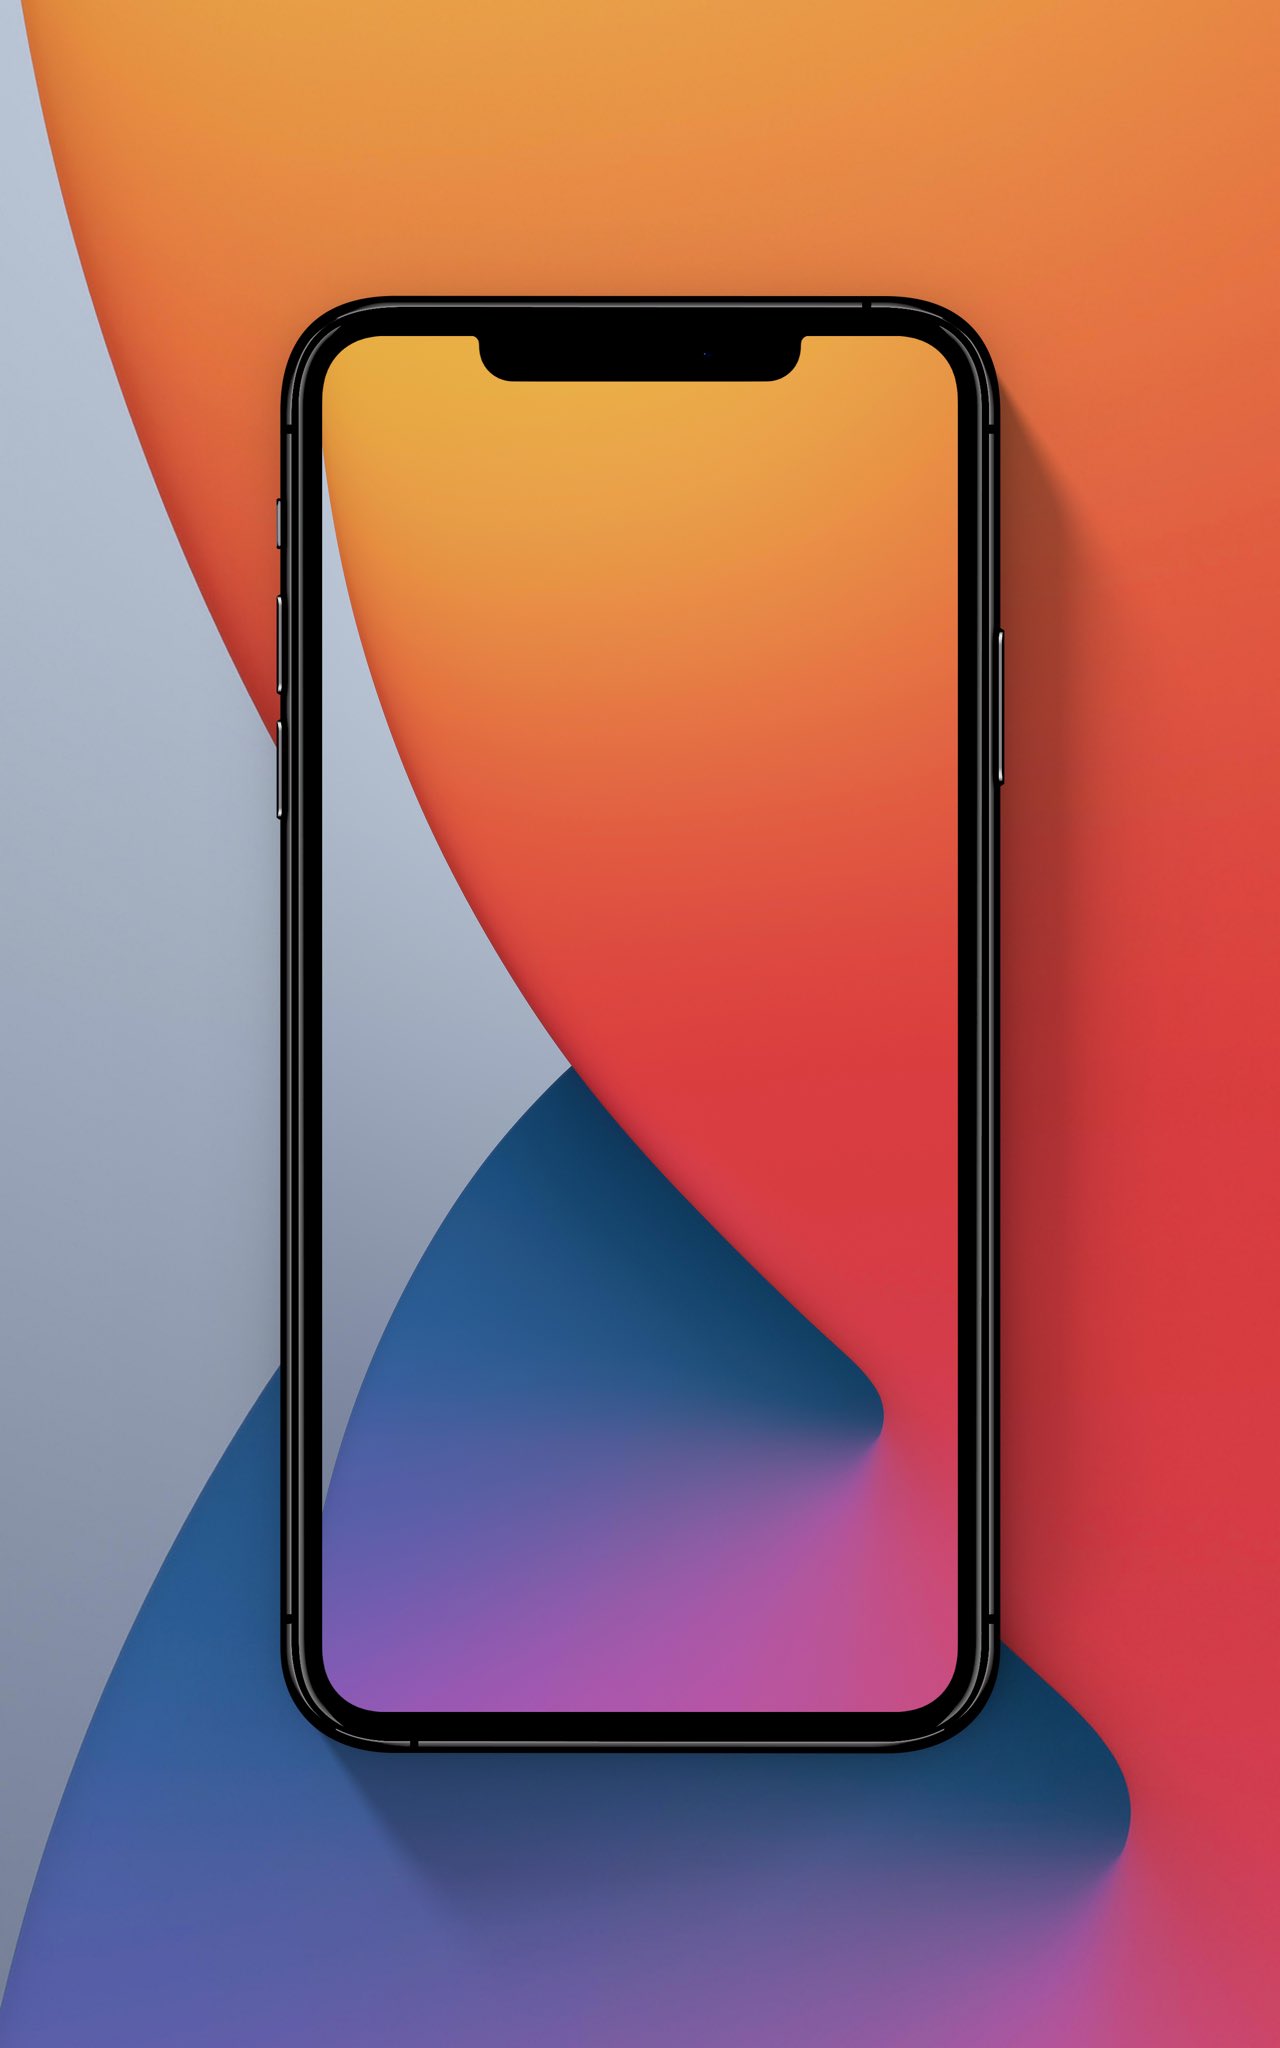 AR7 on wallpapers iOS14 iOS 14 stock wallpaper for